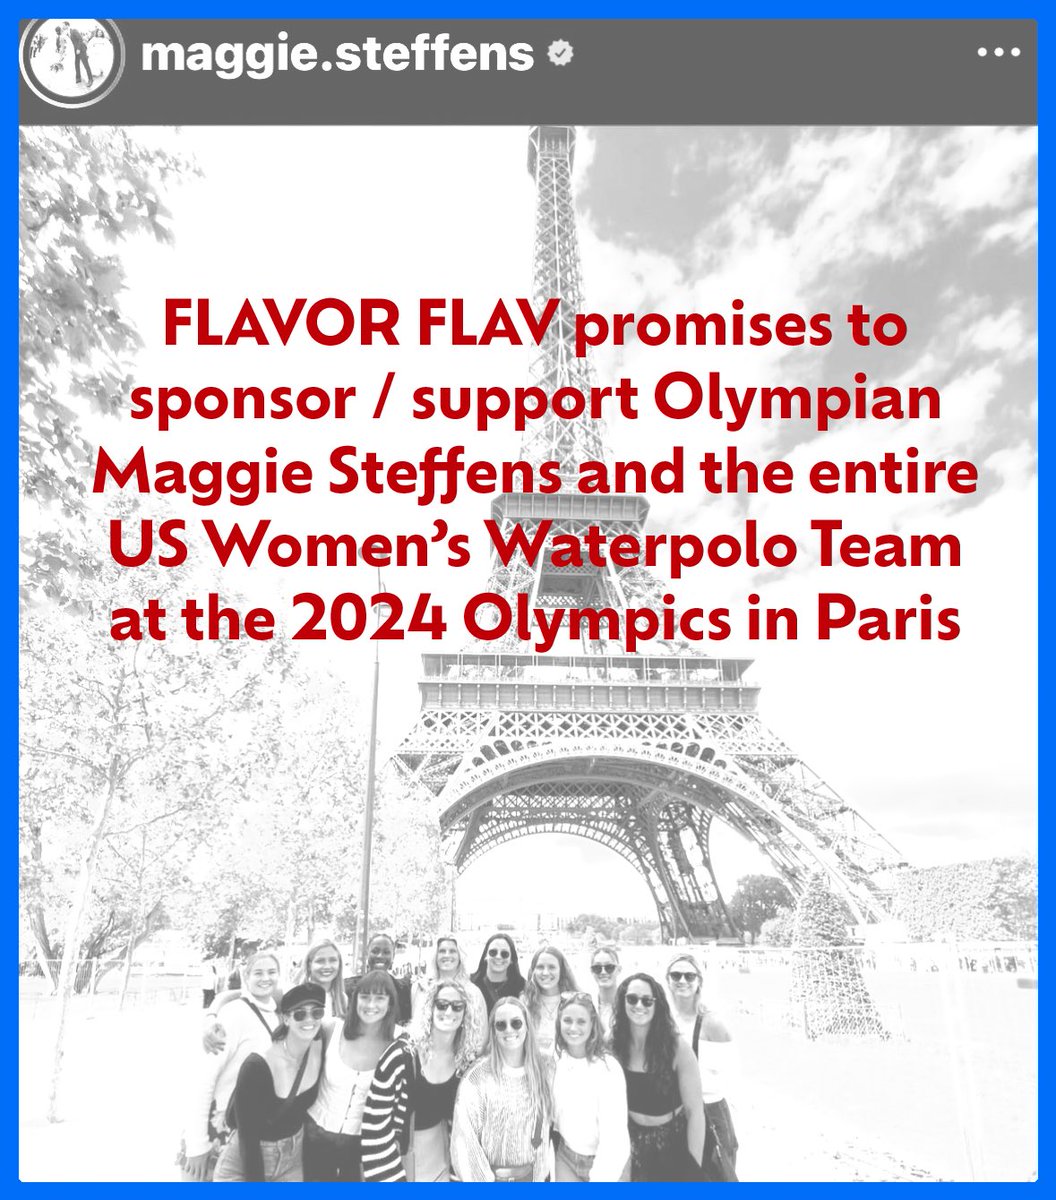 The US Women’s Waterpolo team has won the GOLD MEDAL THREE OLYMPICS IN A ROW,,, these women should not have to be working 2-3 side jobs to be able to compete. FLAVOR FLAV promises to sponsor/support captain Maggie Steffens the US Women’s Waterpolo team,,, GO #TeamUSA 🇺🇸🇺🇸🇺🇸🇺🇸